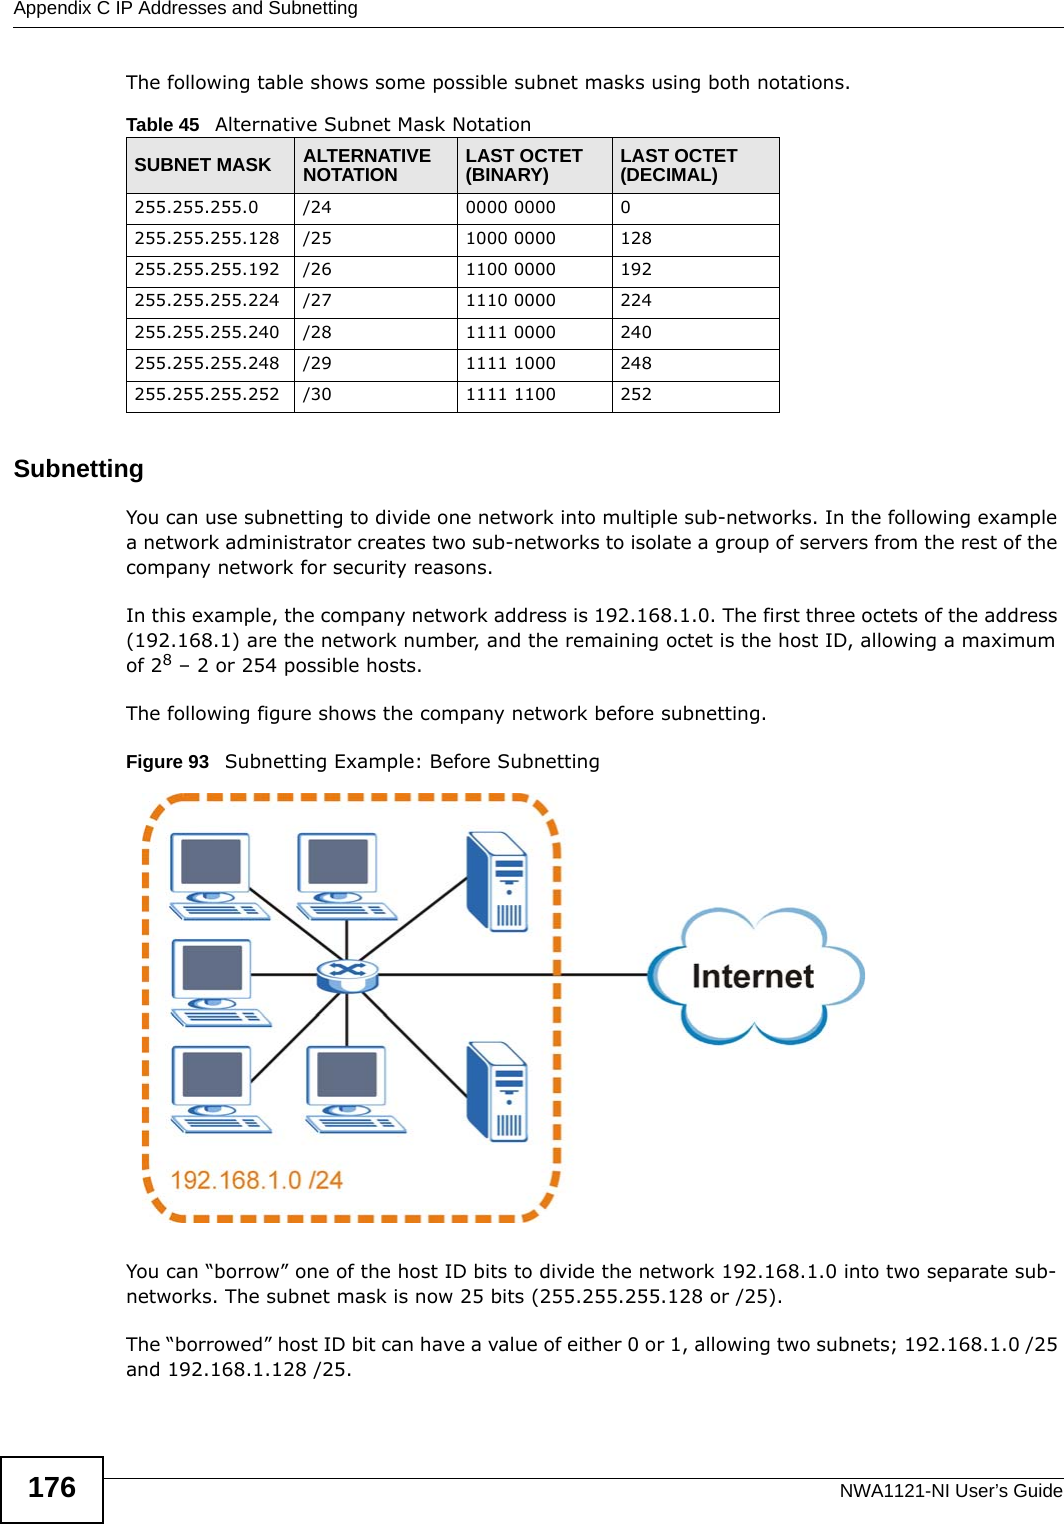 Appendix C IP Addresses and SubnettingNWA1121-NI User’s Guide176The following table shows some possible subnet masks using both notations. SubnettingYou can use subnetting to divide one network into multiple sub-networks. In the following example a network administrator creates two sub-networks to isolate a group of servers from the rest of the company network for security reasons.In this example, the company network address is 192.168.1.0. The first three octets of the address (192.168.1) are the network number, and the remaining octet is the host ID, allowing a maximum of 28 – 2 or 254 possible hosts.The following figure shows the company network before subnetting. Figure 93   Subnetting Example: Before SubnettingYou can “borrow” one of the host ID bits to divide the network 192.168.1.0 into two separate sub-networks. The subnet mask is now 25 bits (255.255.255.128 or /25).The “borrowed” host ID bit can have a value of either 0 or 1, allowing two subnets; 192.168.1.0 /25 and 192.168.1.128 /25. Table 45   Alternative Subnet Mask NotationSUBNET MASK ALTERNATIVE NOTATION LAST OCTET (BINARY) LAST OCTET (DECIMAL)255.255.255.0 /24 0000 0000 0255.255.255.128 /25 1000 0000 128255.255.255.192 /26 1100 0000 192255.255.255.224 /27 1110 0000 224255.255.255.240 /28 1111 0000 240255.255.255.248 /29 1111 1000 248255.255.255.252 /30 1111 1100 252